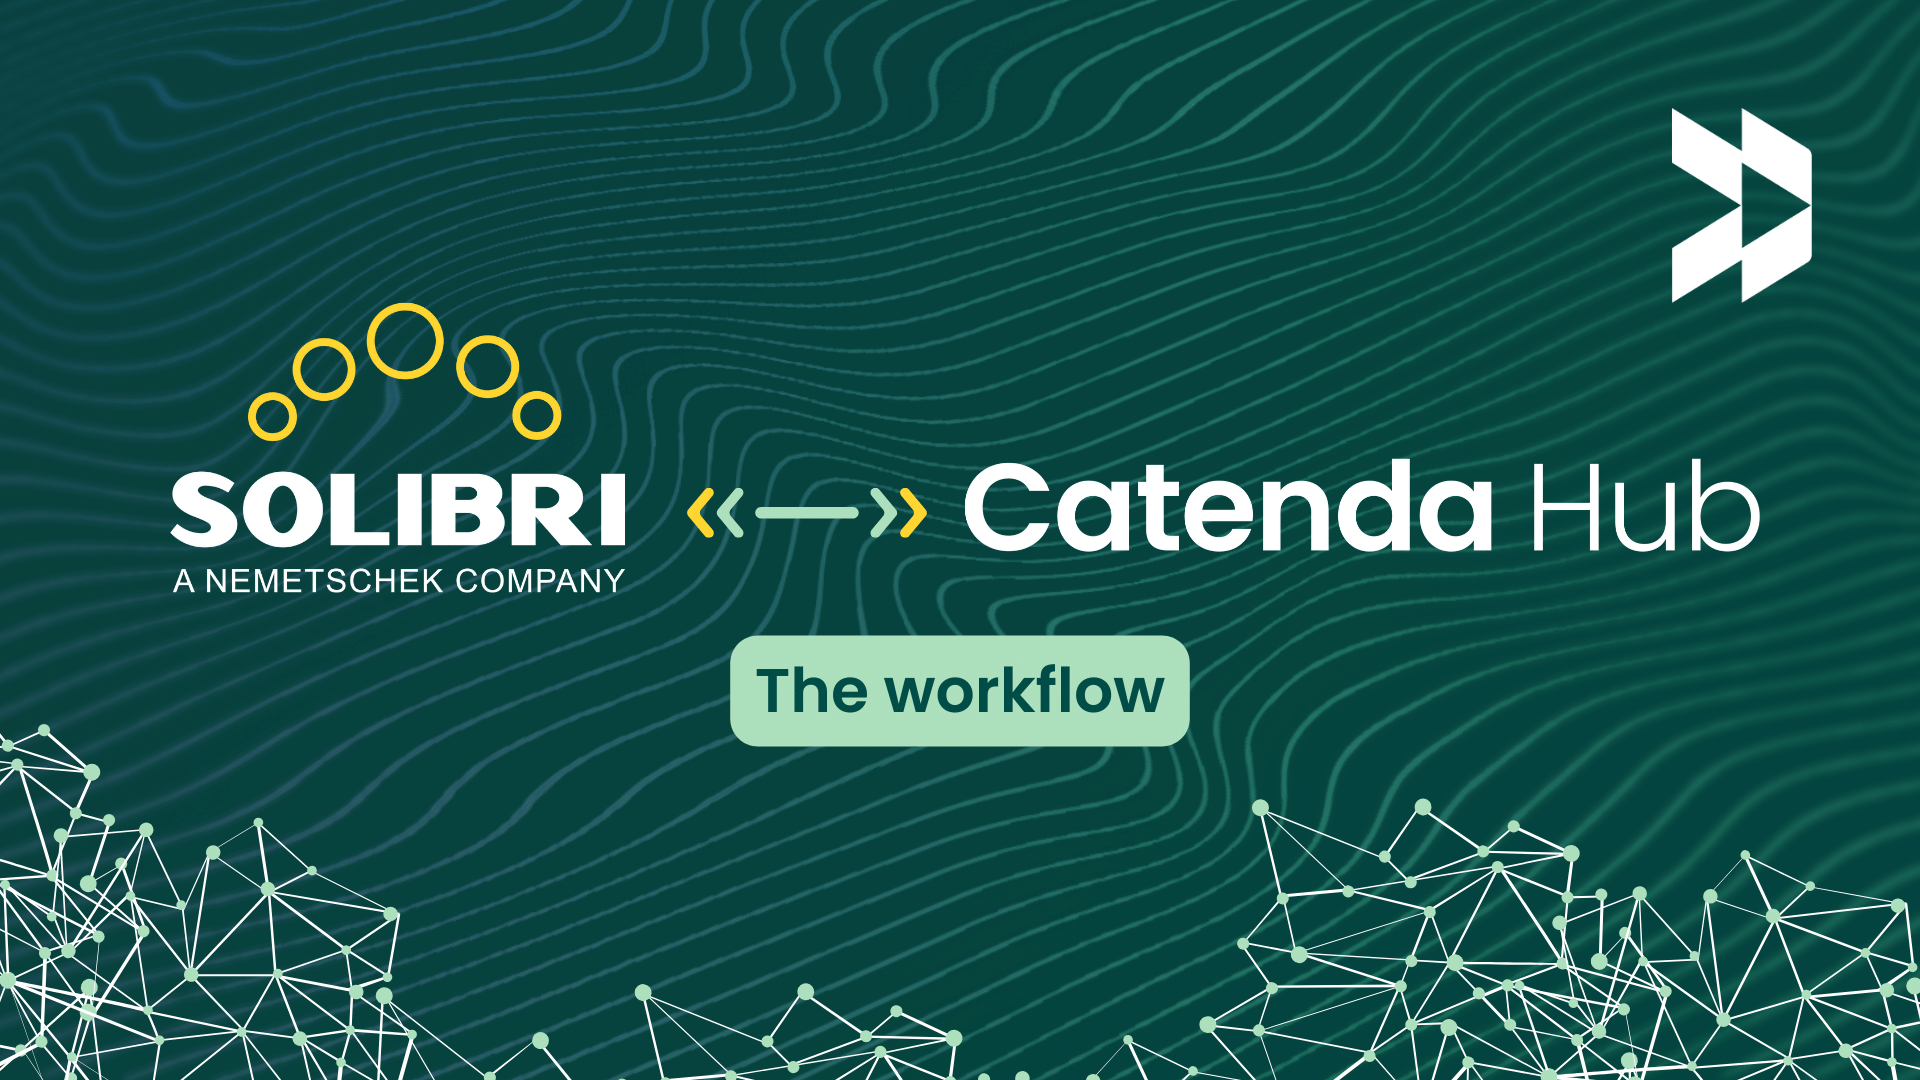 Solibri-a-nemetschek-company-and-Catenda-Hub-BCF-connection-discover the workflow